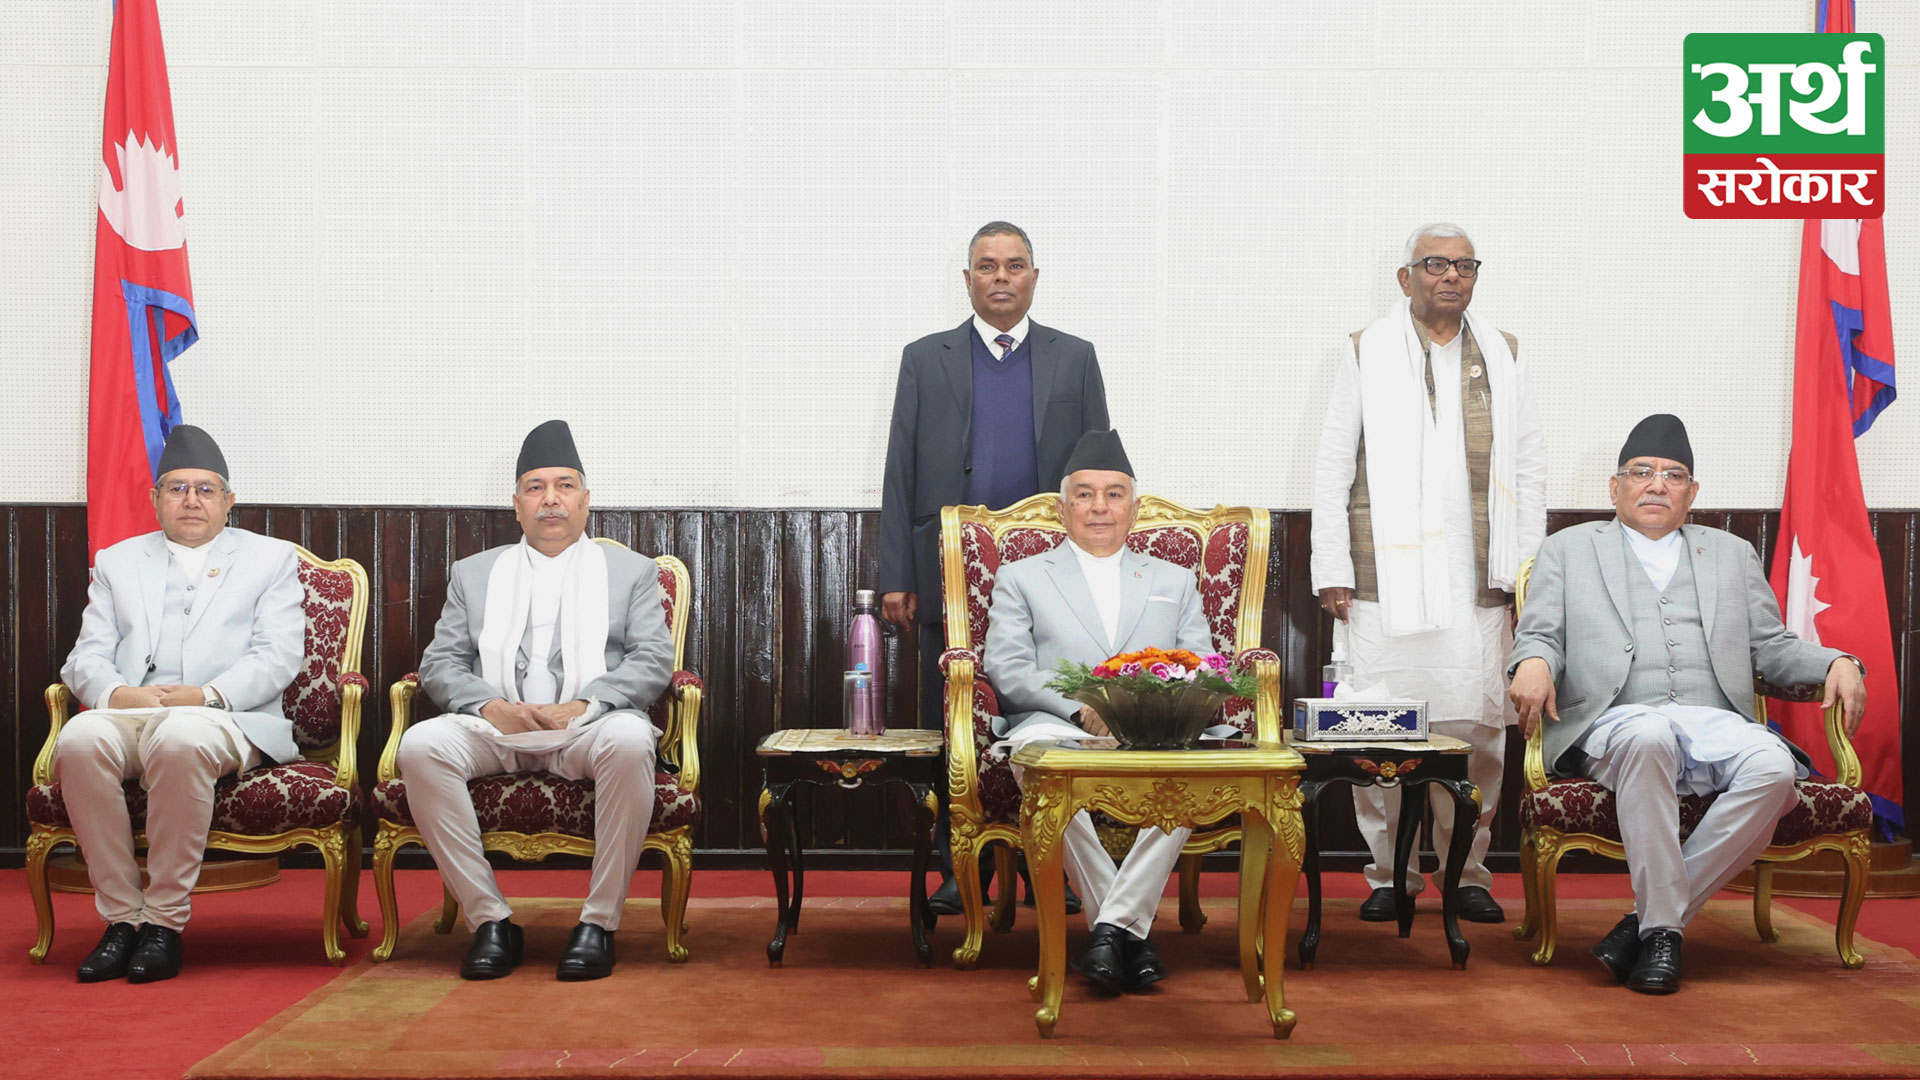 Two ministers, including DPM Yadav, take the oath before the president